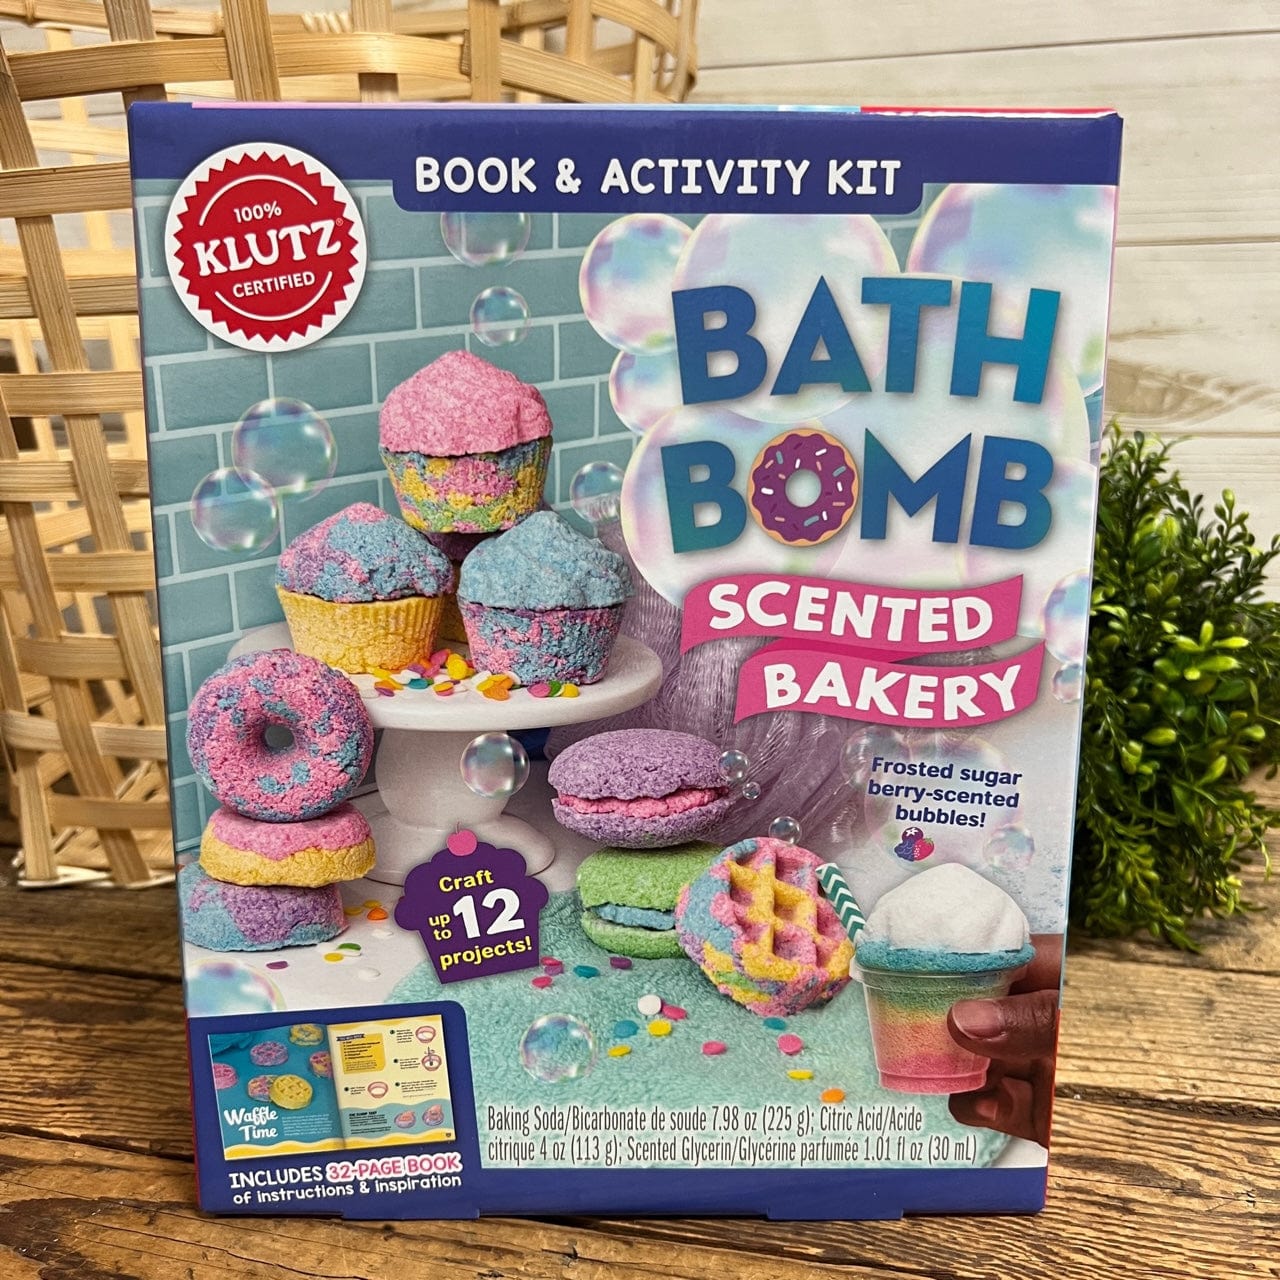 Bath Bomb Scented Bakery [Book]